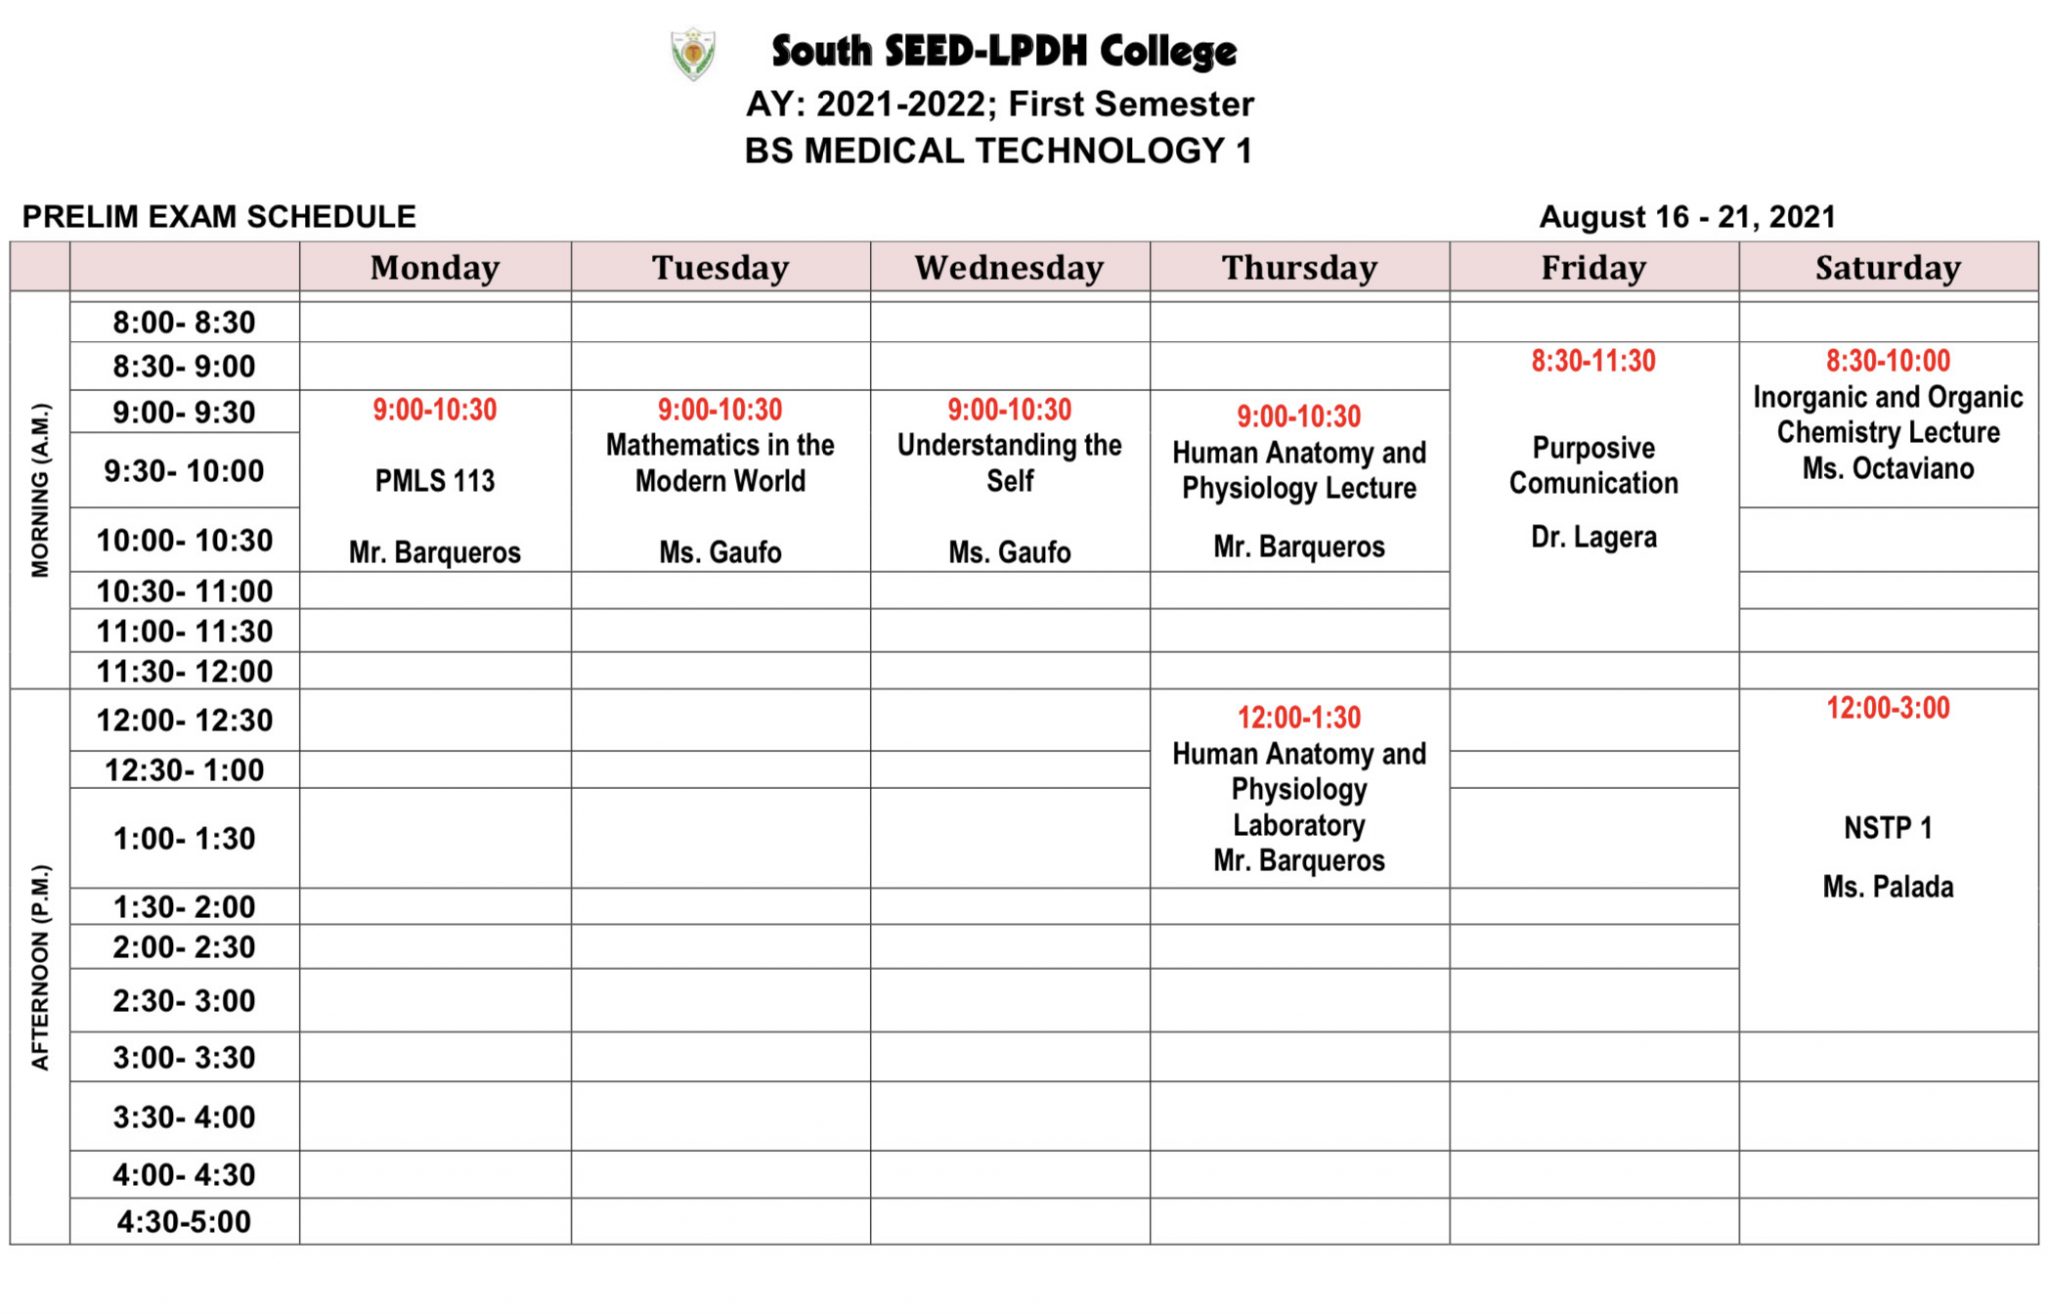 BS Medical Technology Examination Schedule South SEED LPDH College